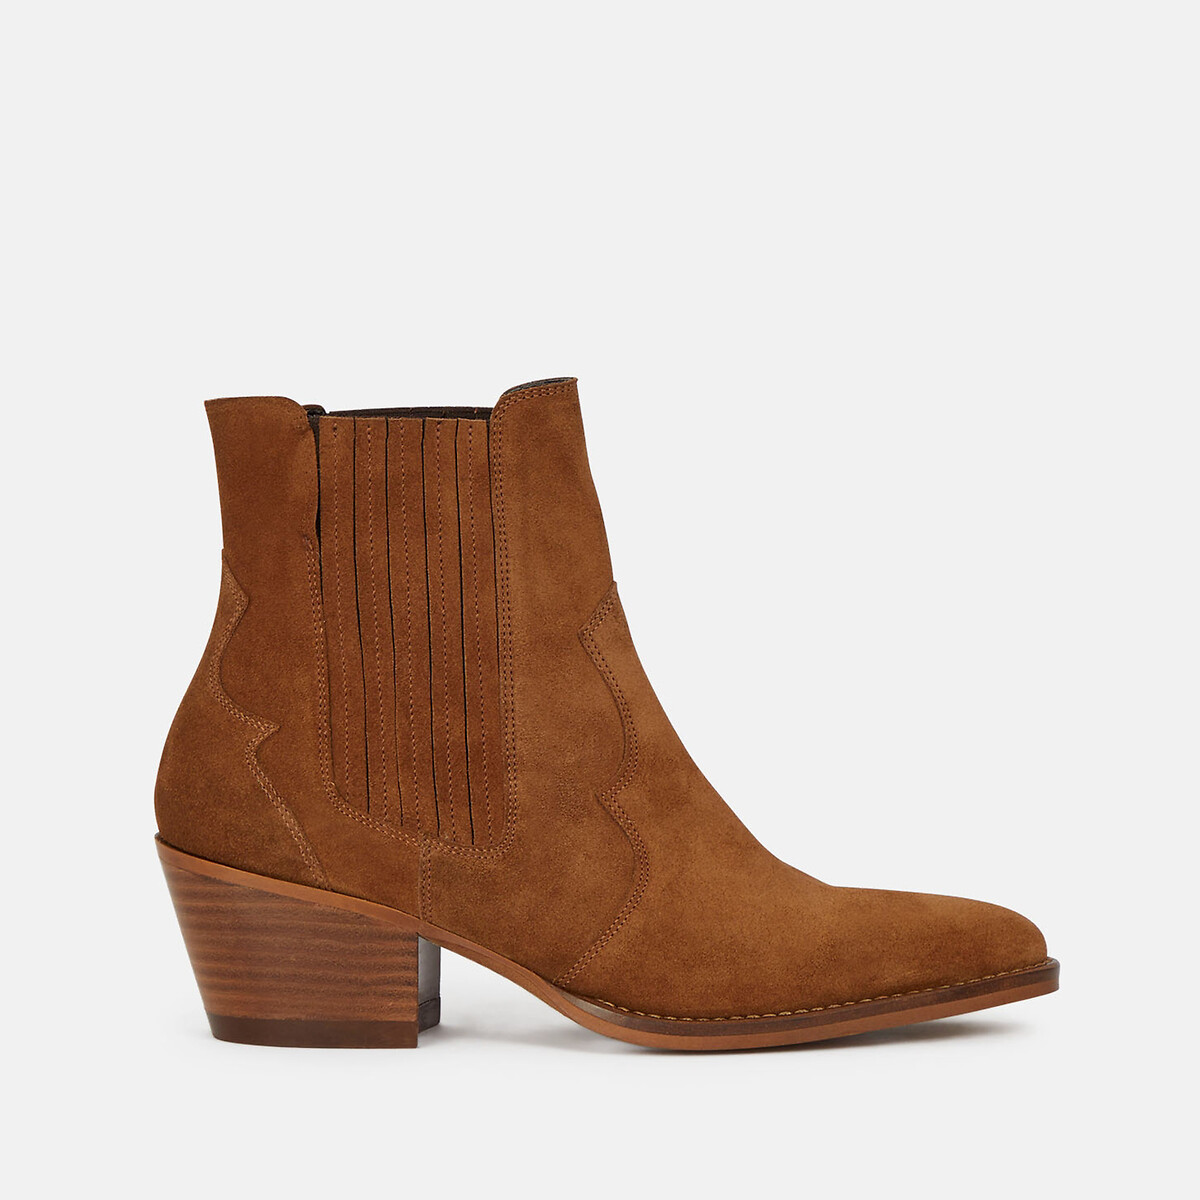 Vannya suede ankle boots, brown, Minelli | La Redoute